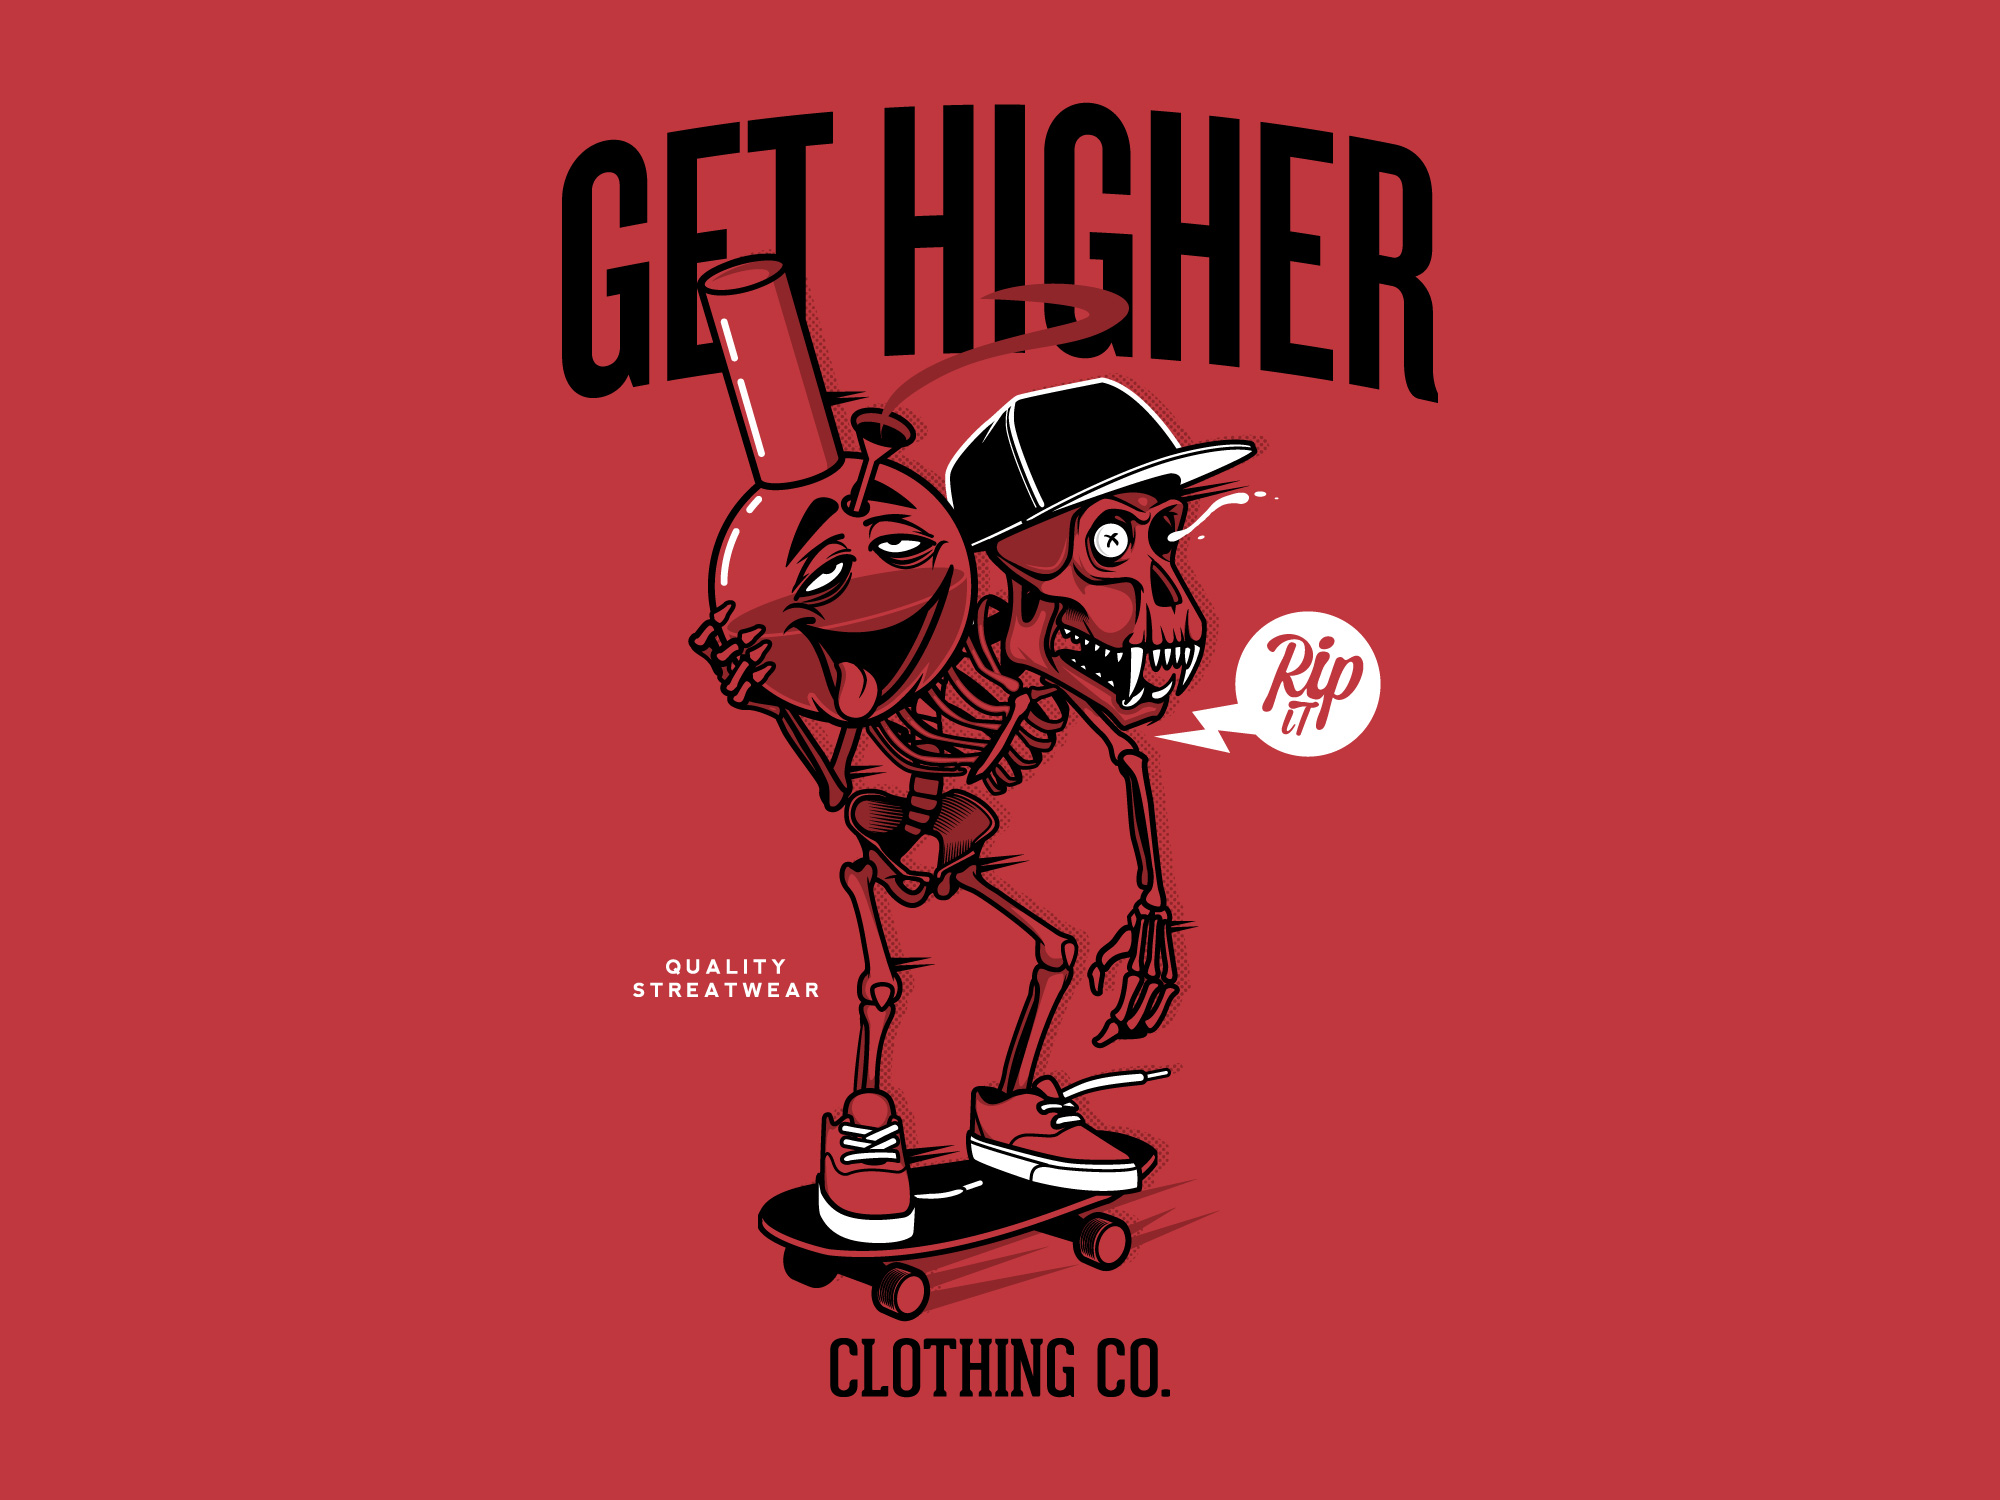 Get Higher Clothing